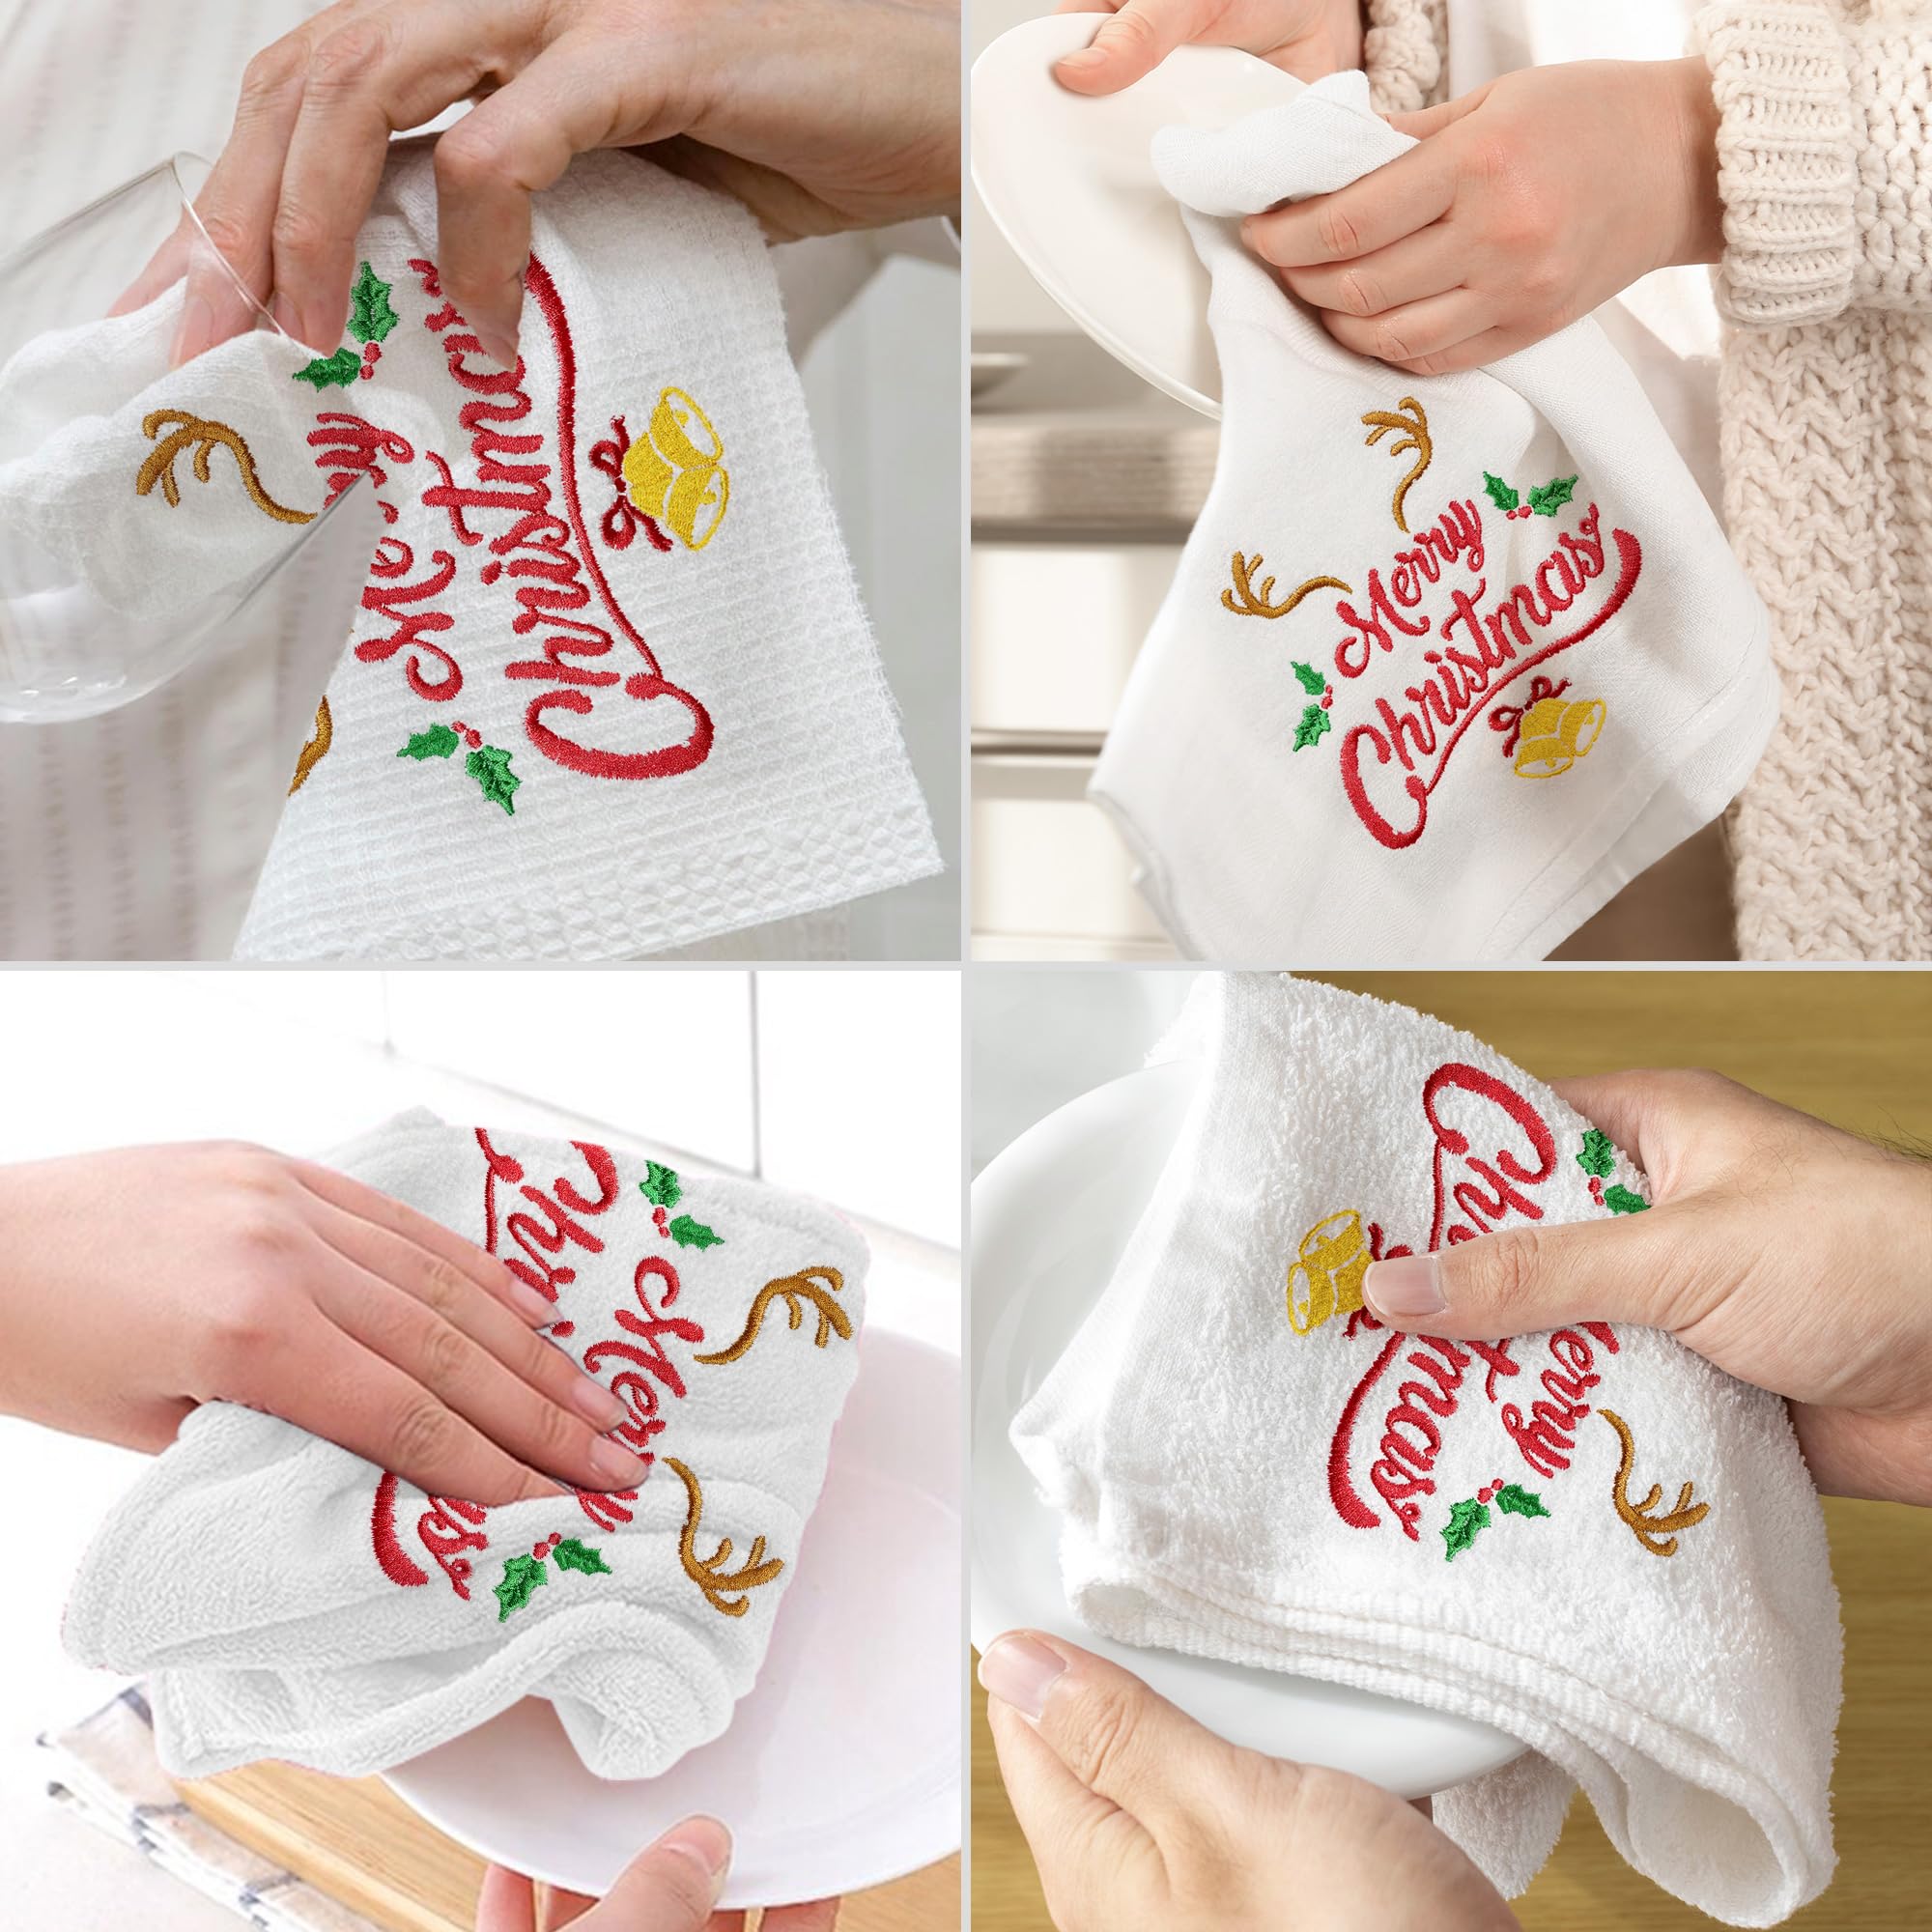 Christmas Hand Towels Cotton Embroidered Sets of 2 - Christmas Kitchen Towels Bathroom - Christmas Dish Towels Tea Dishcloths - Holiday Decorative Winter Xmas Tree Farmhouse Hostess Housewarming Gifts